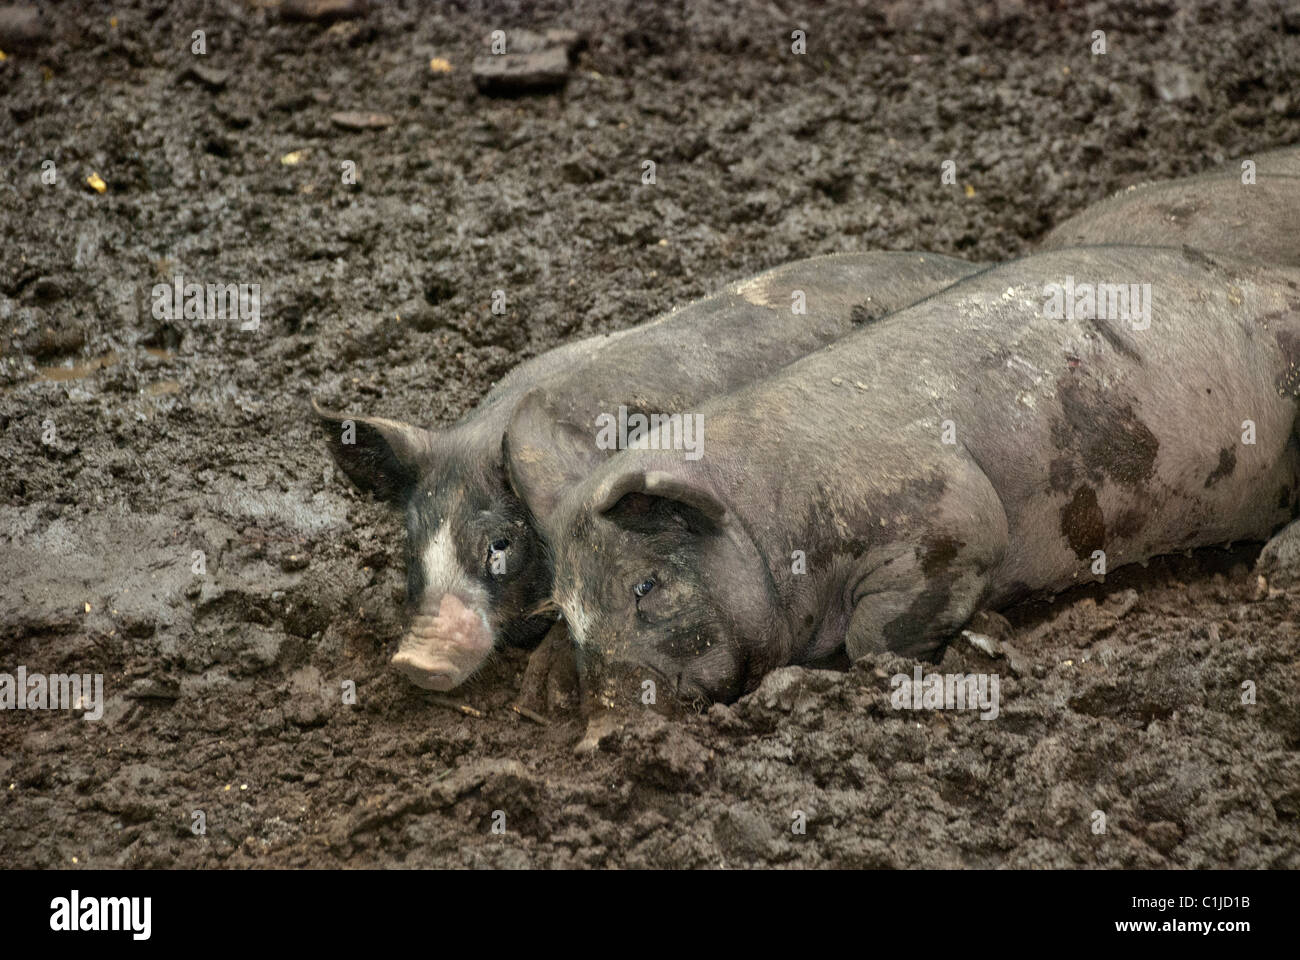 Berkshire Pigs, Stone Barns Center for Food and Agriculture, Pocantico Hills, New York, USA Stock Photo